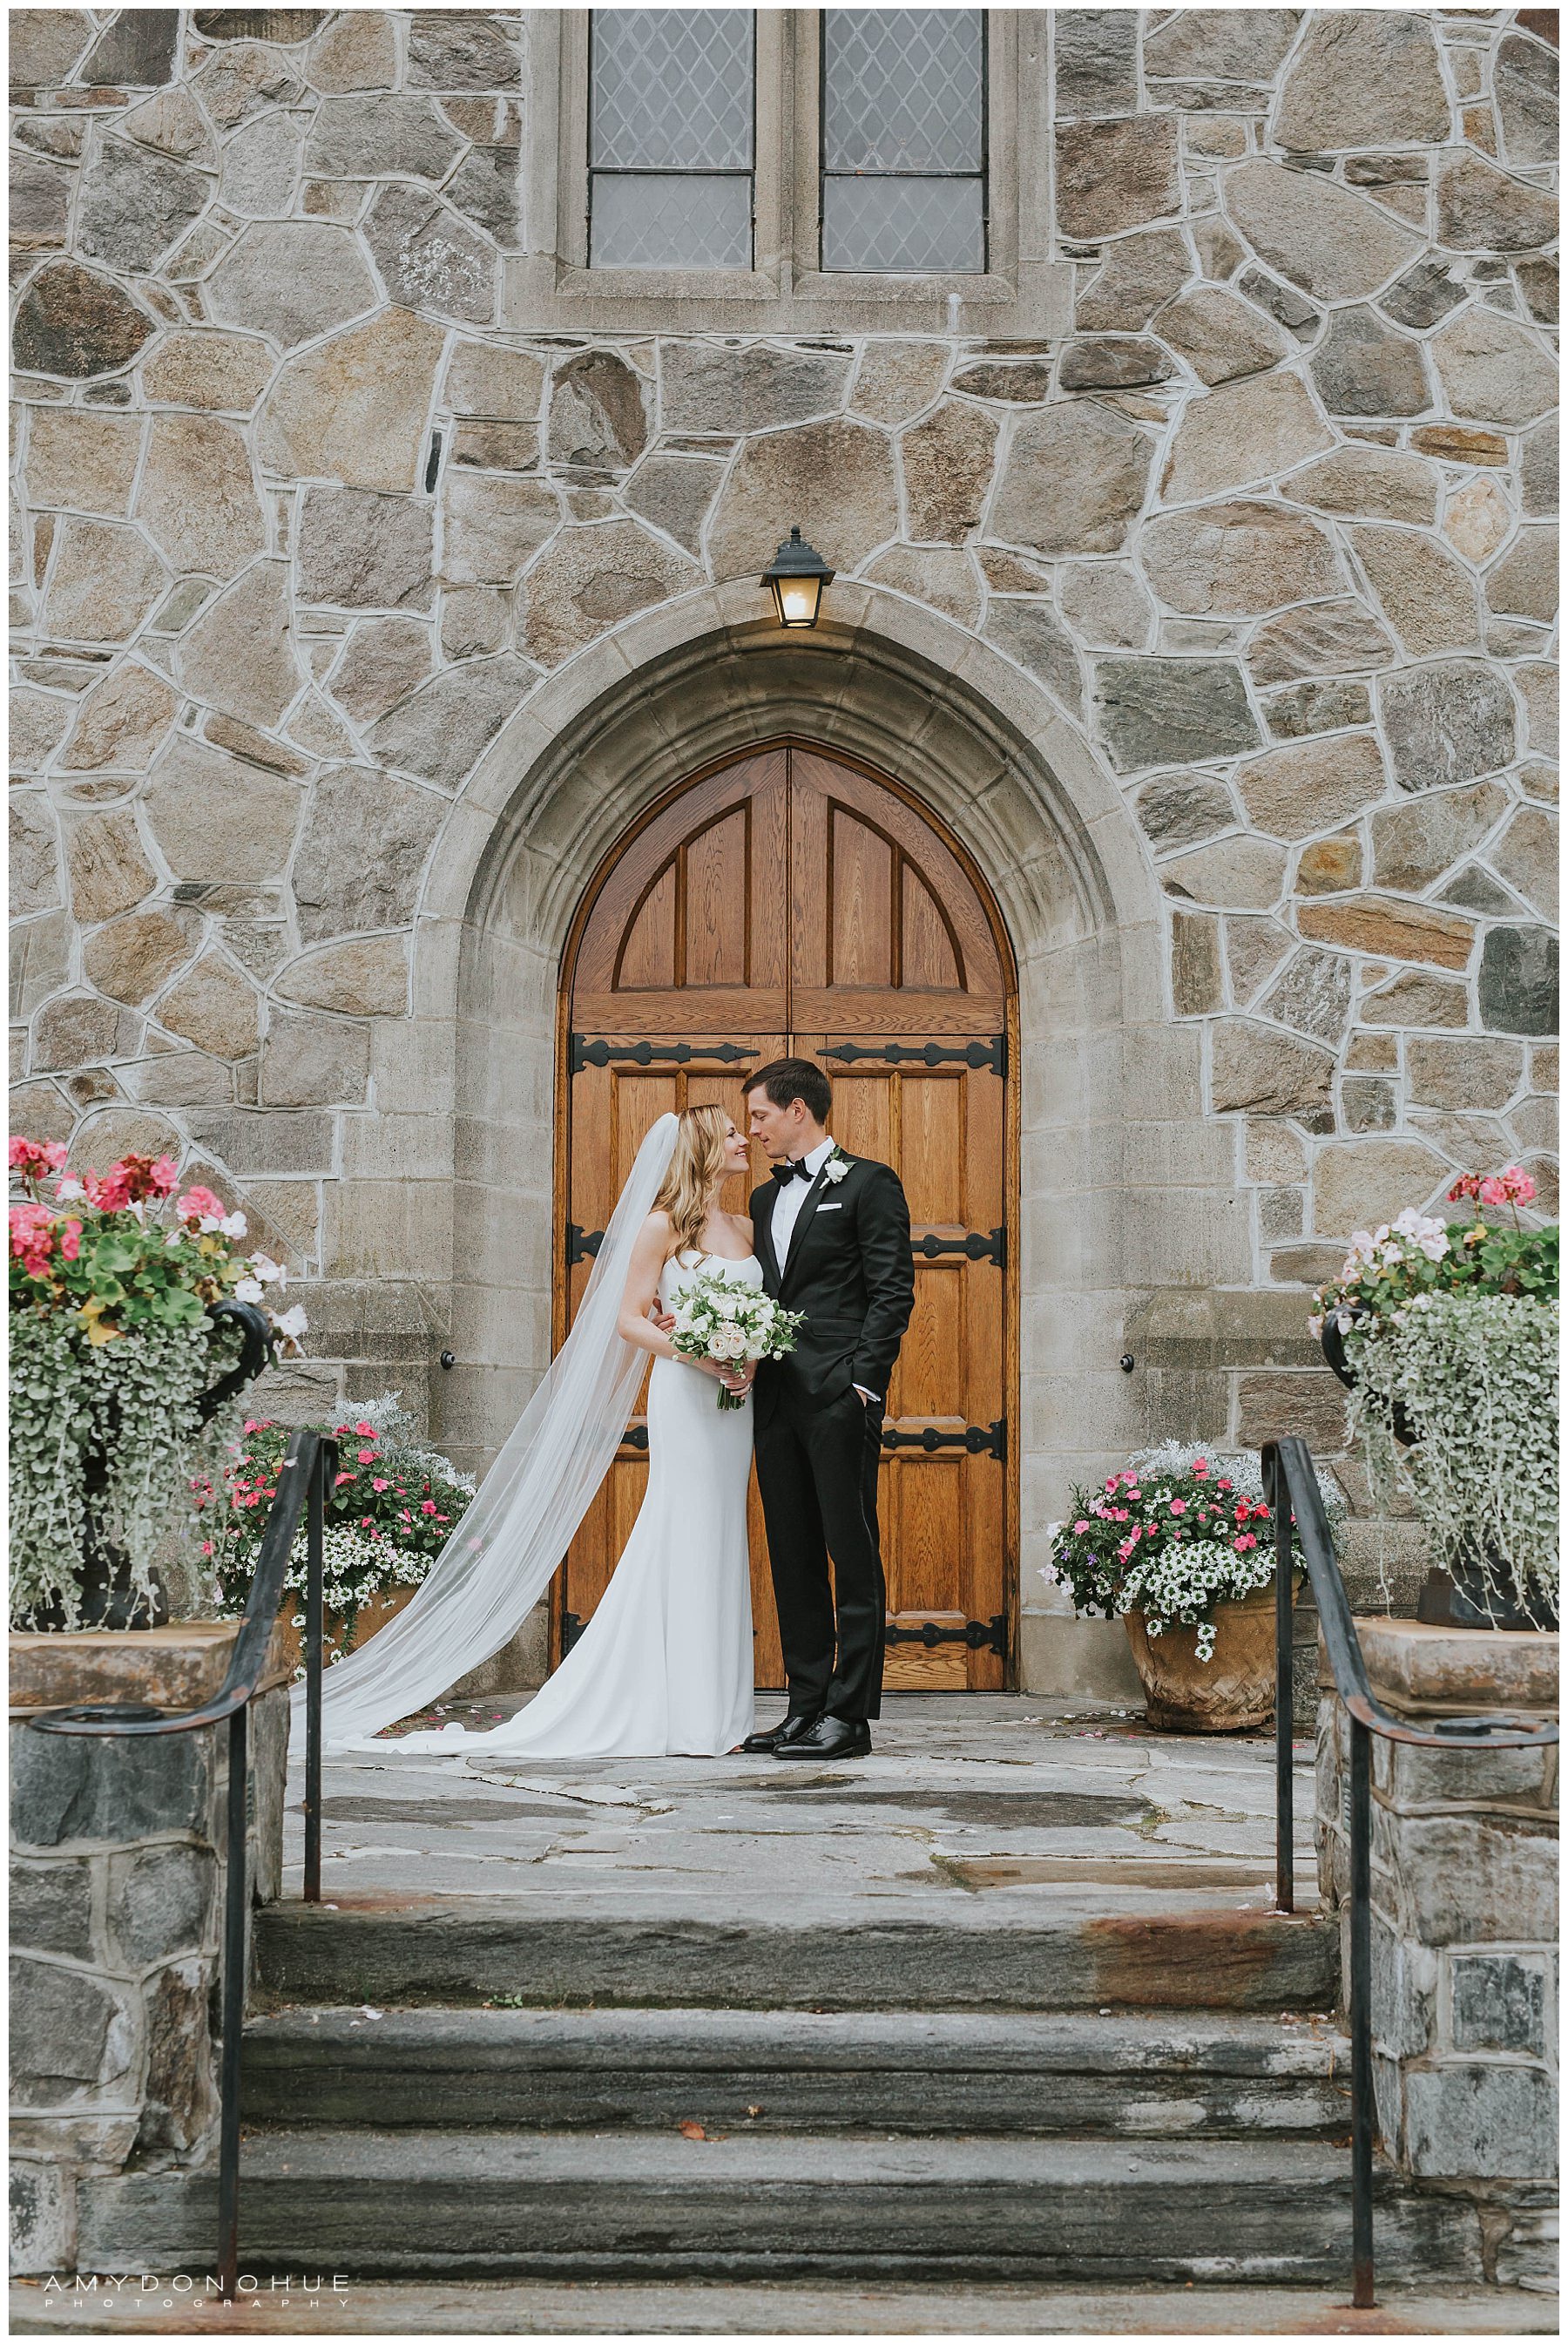 Bride and Groom Portraits | © Amy Donohue Photography | Woodstock, Vermont Wedding Photographer